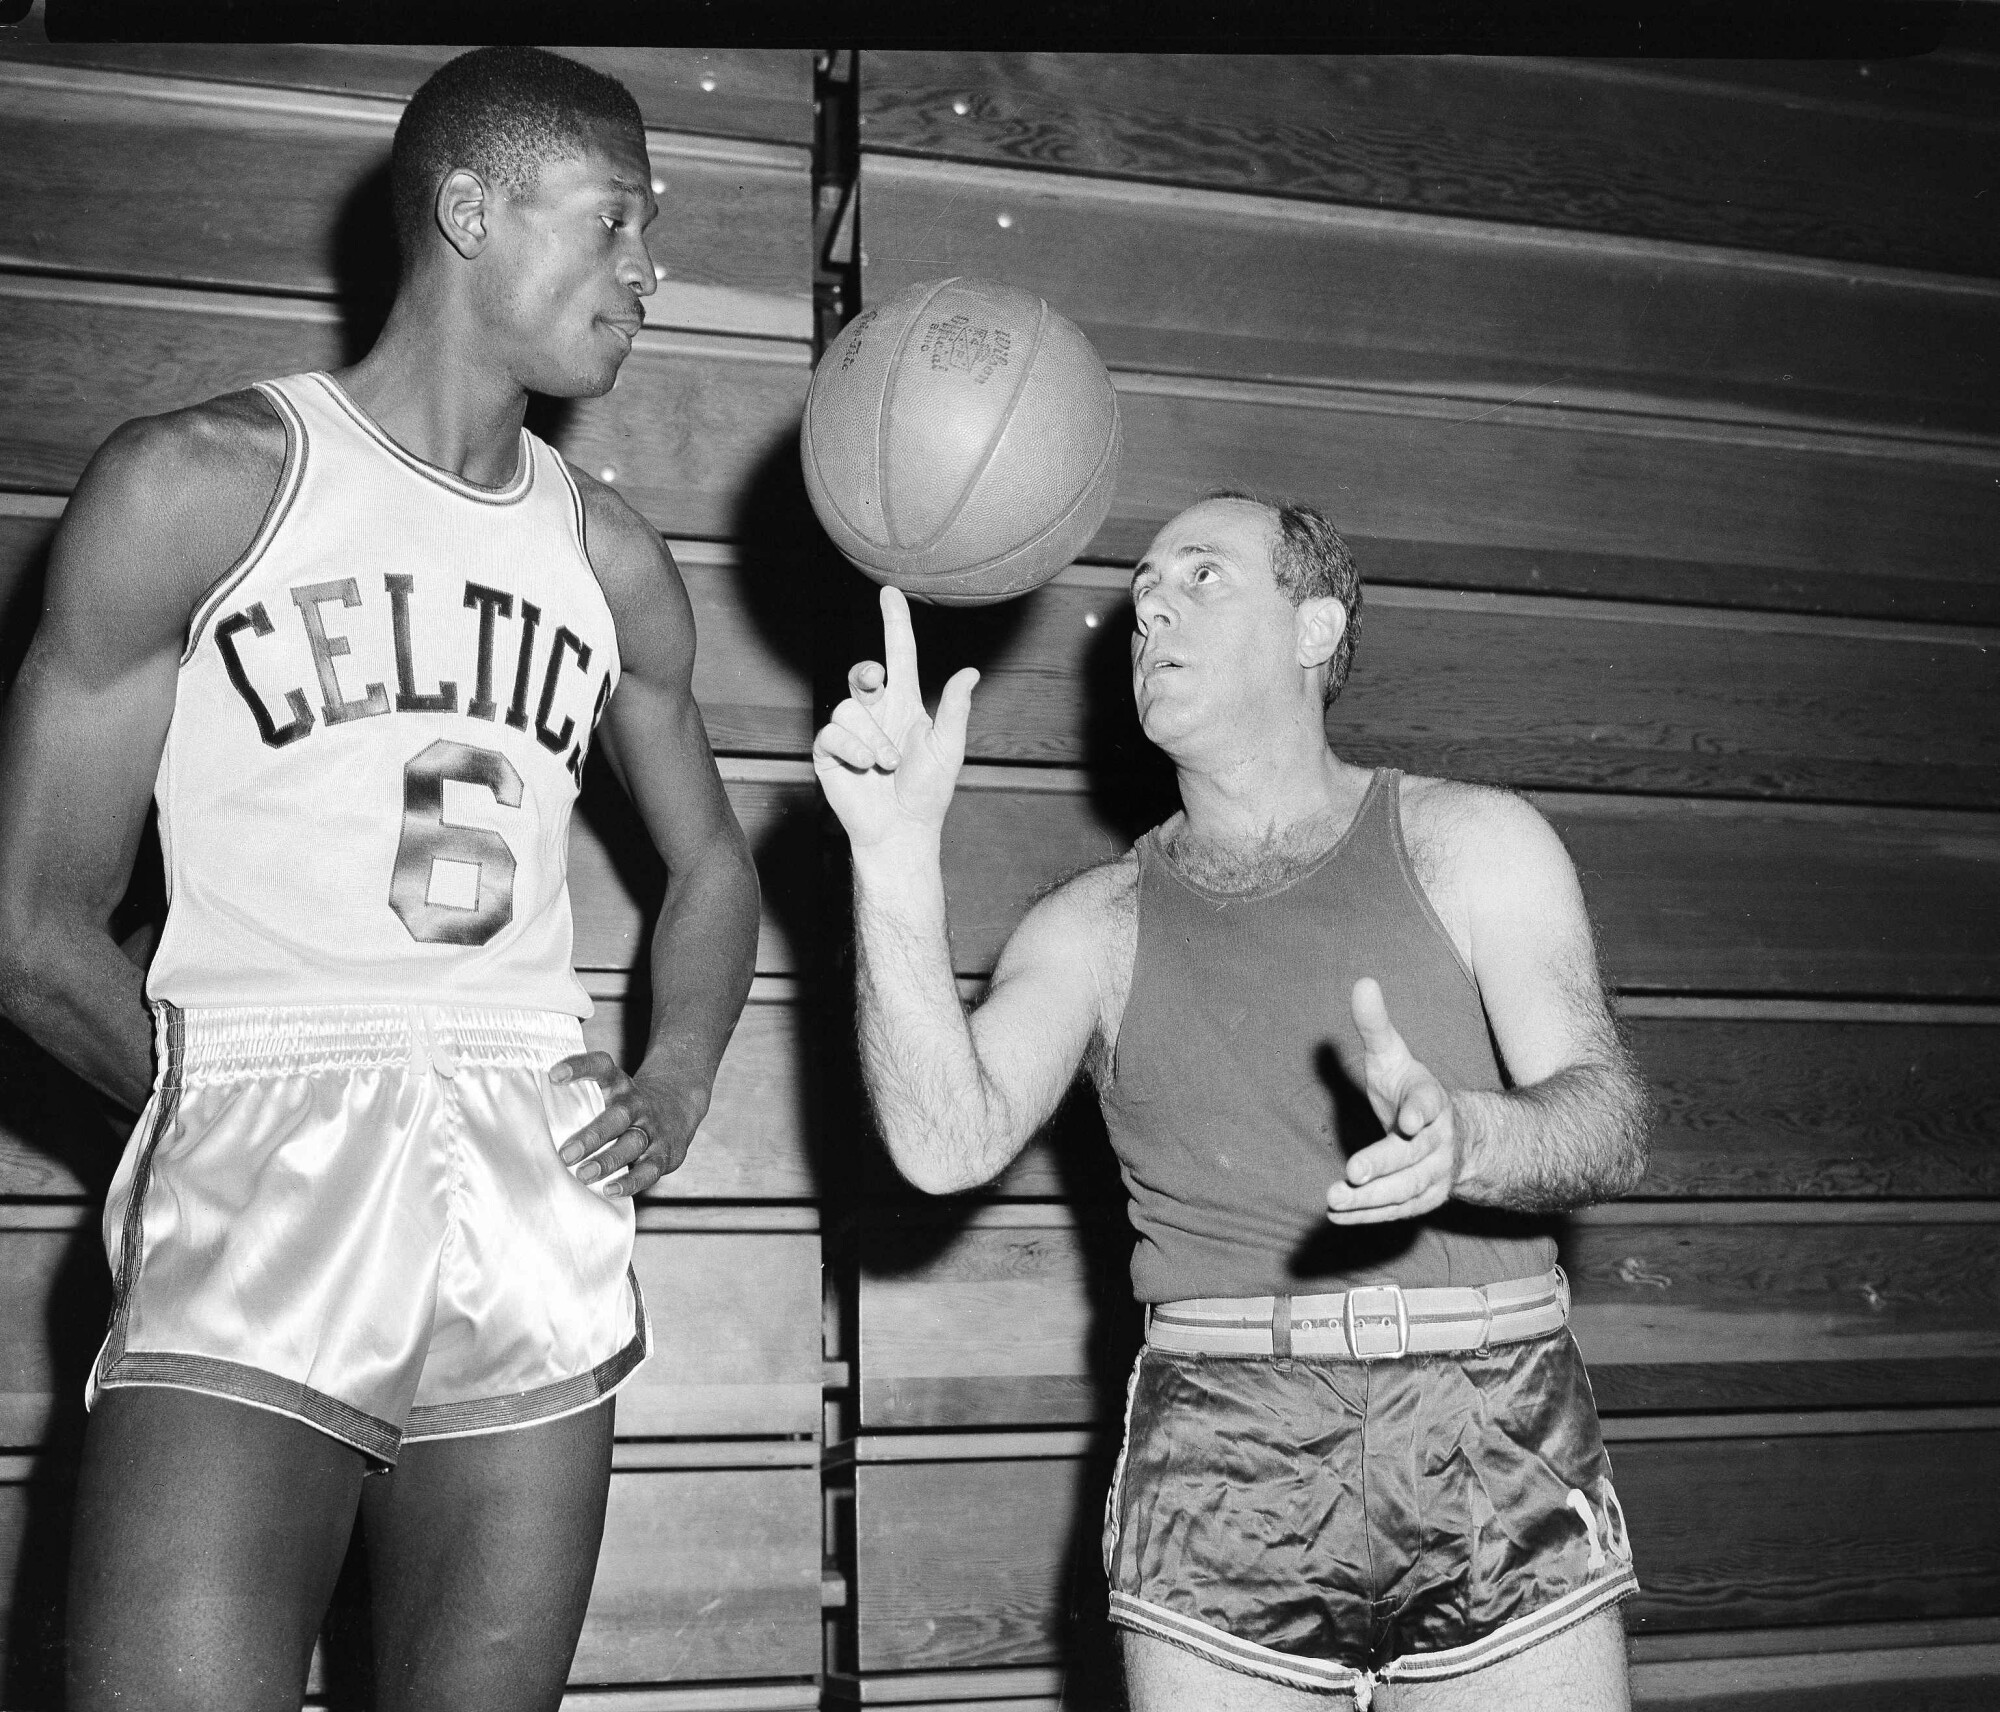 Celtics rookie Bill Russell watches coach Red Auerbach spin the ball on his finger tip.